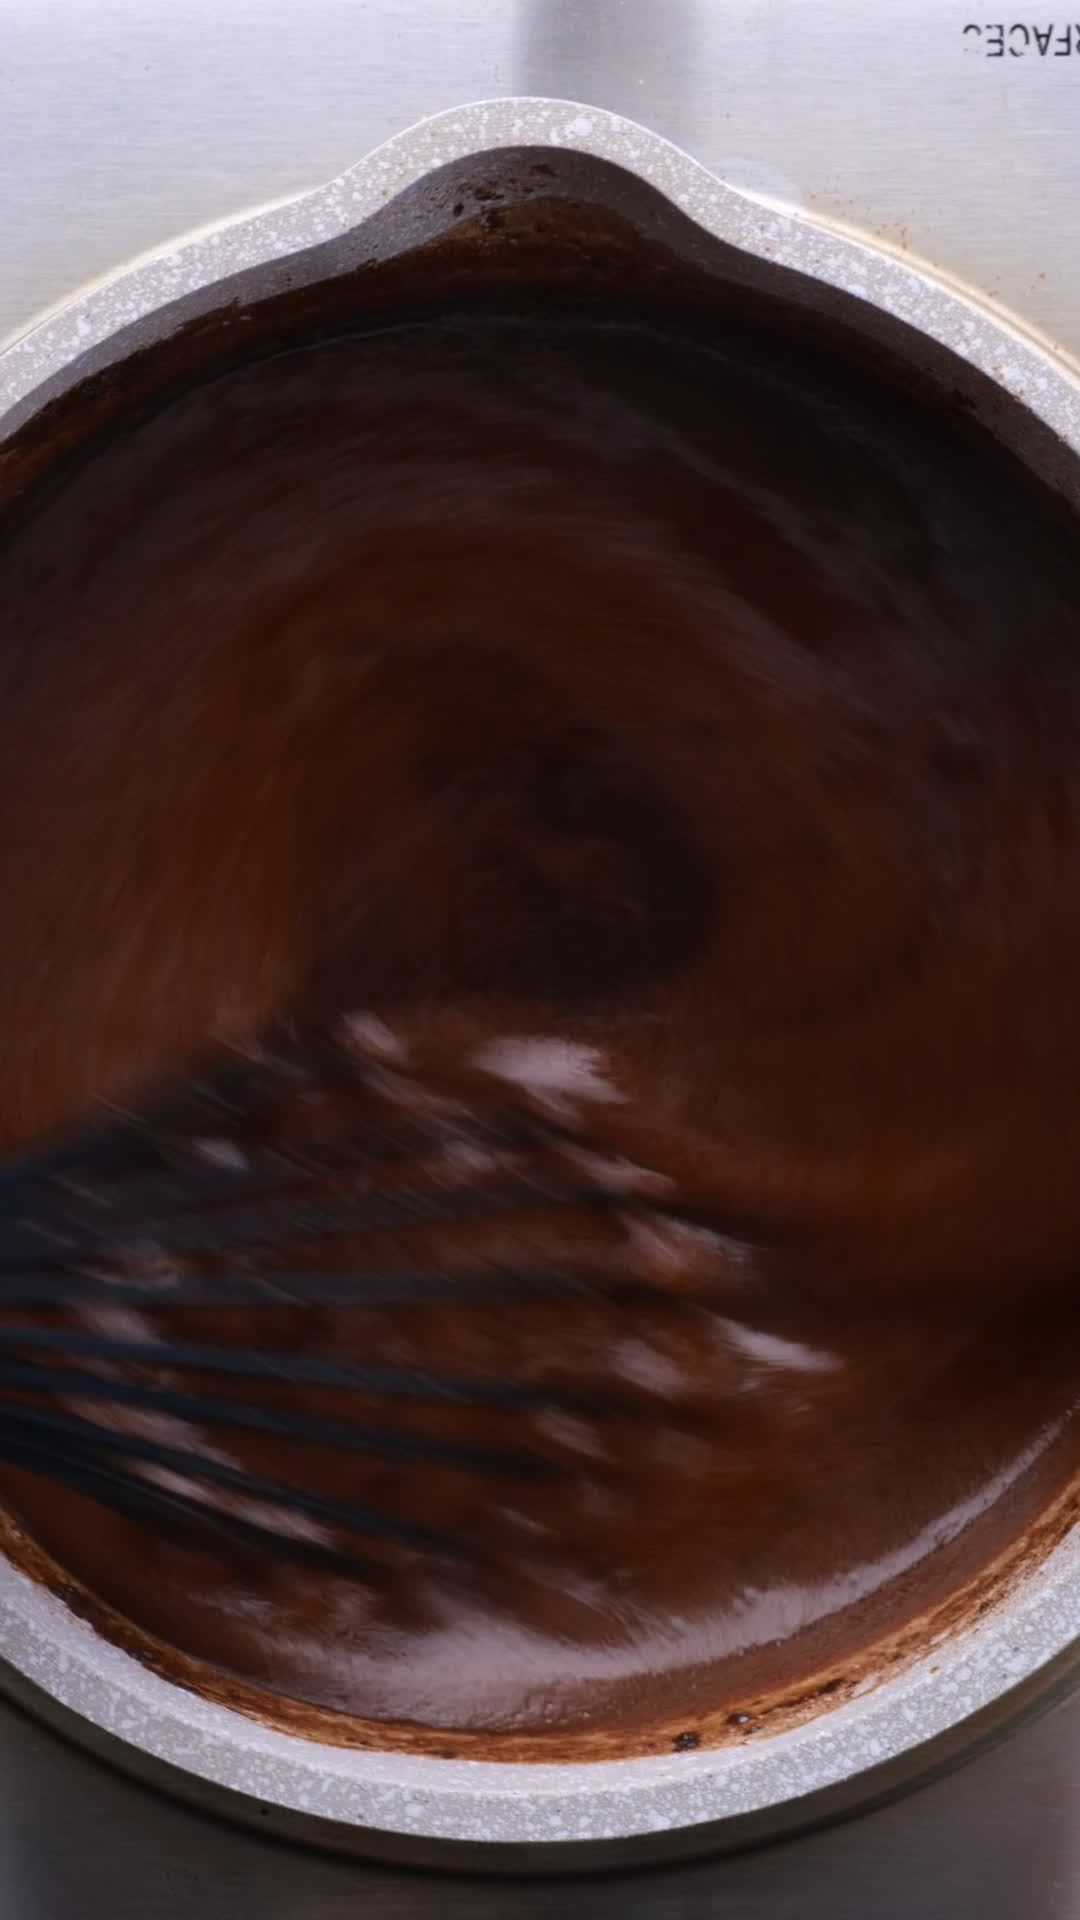 Chocolate mixture being whisked in a mixing bowl